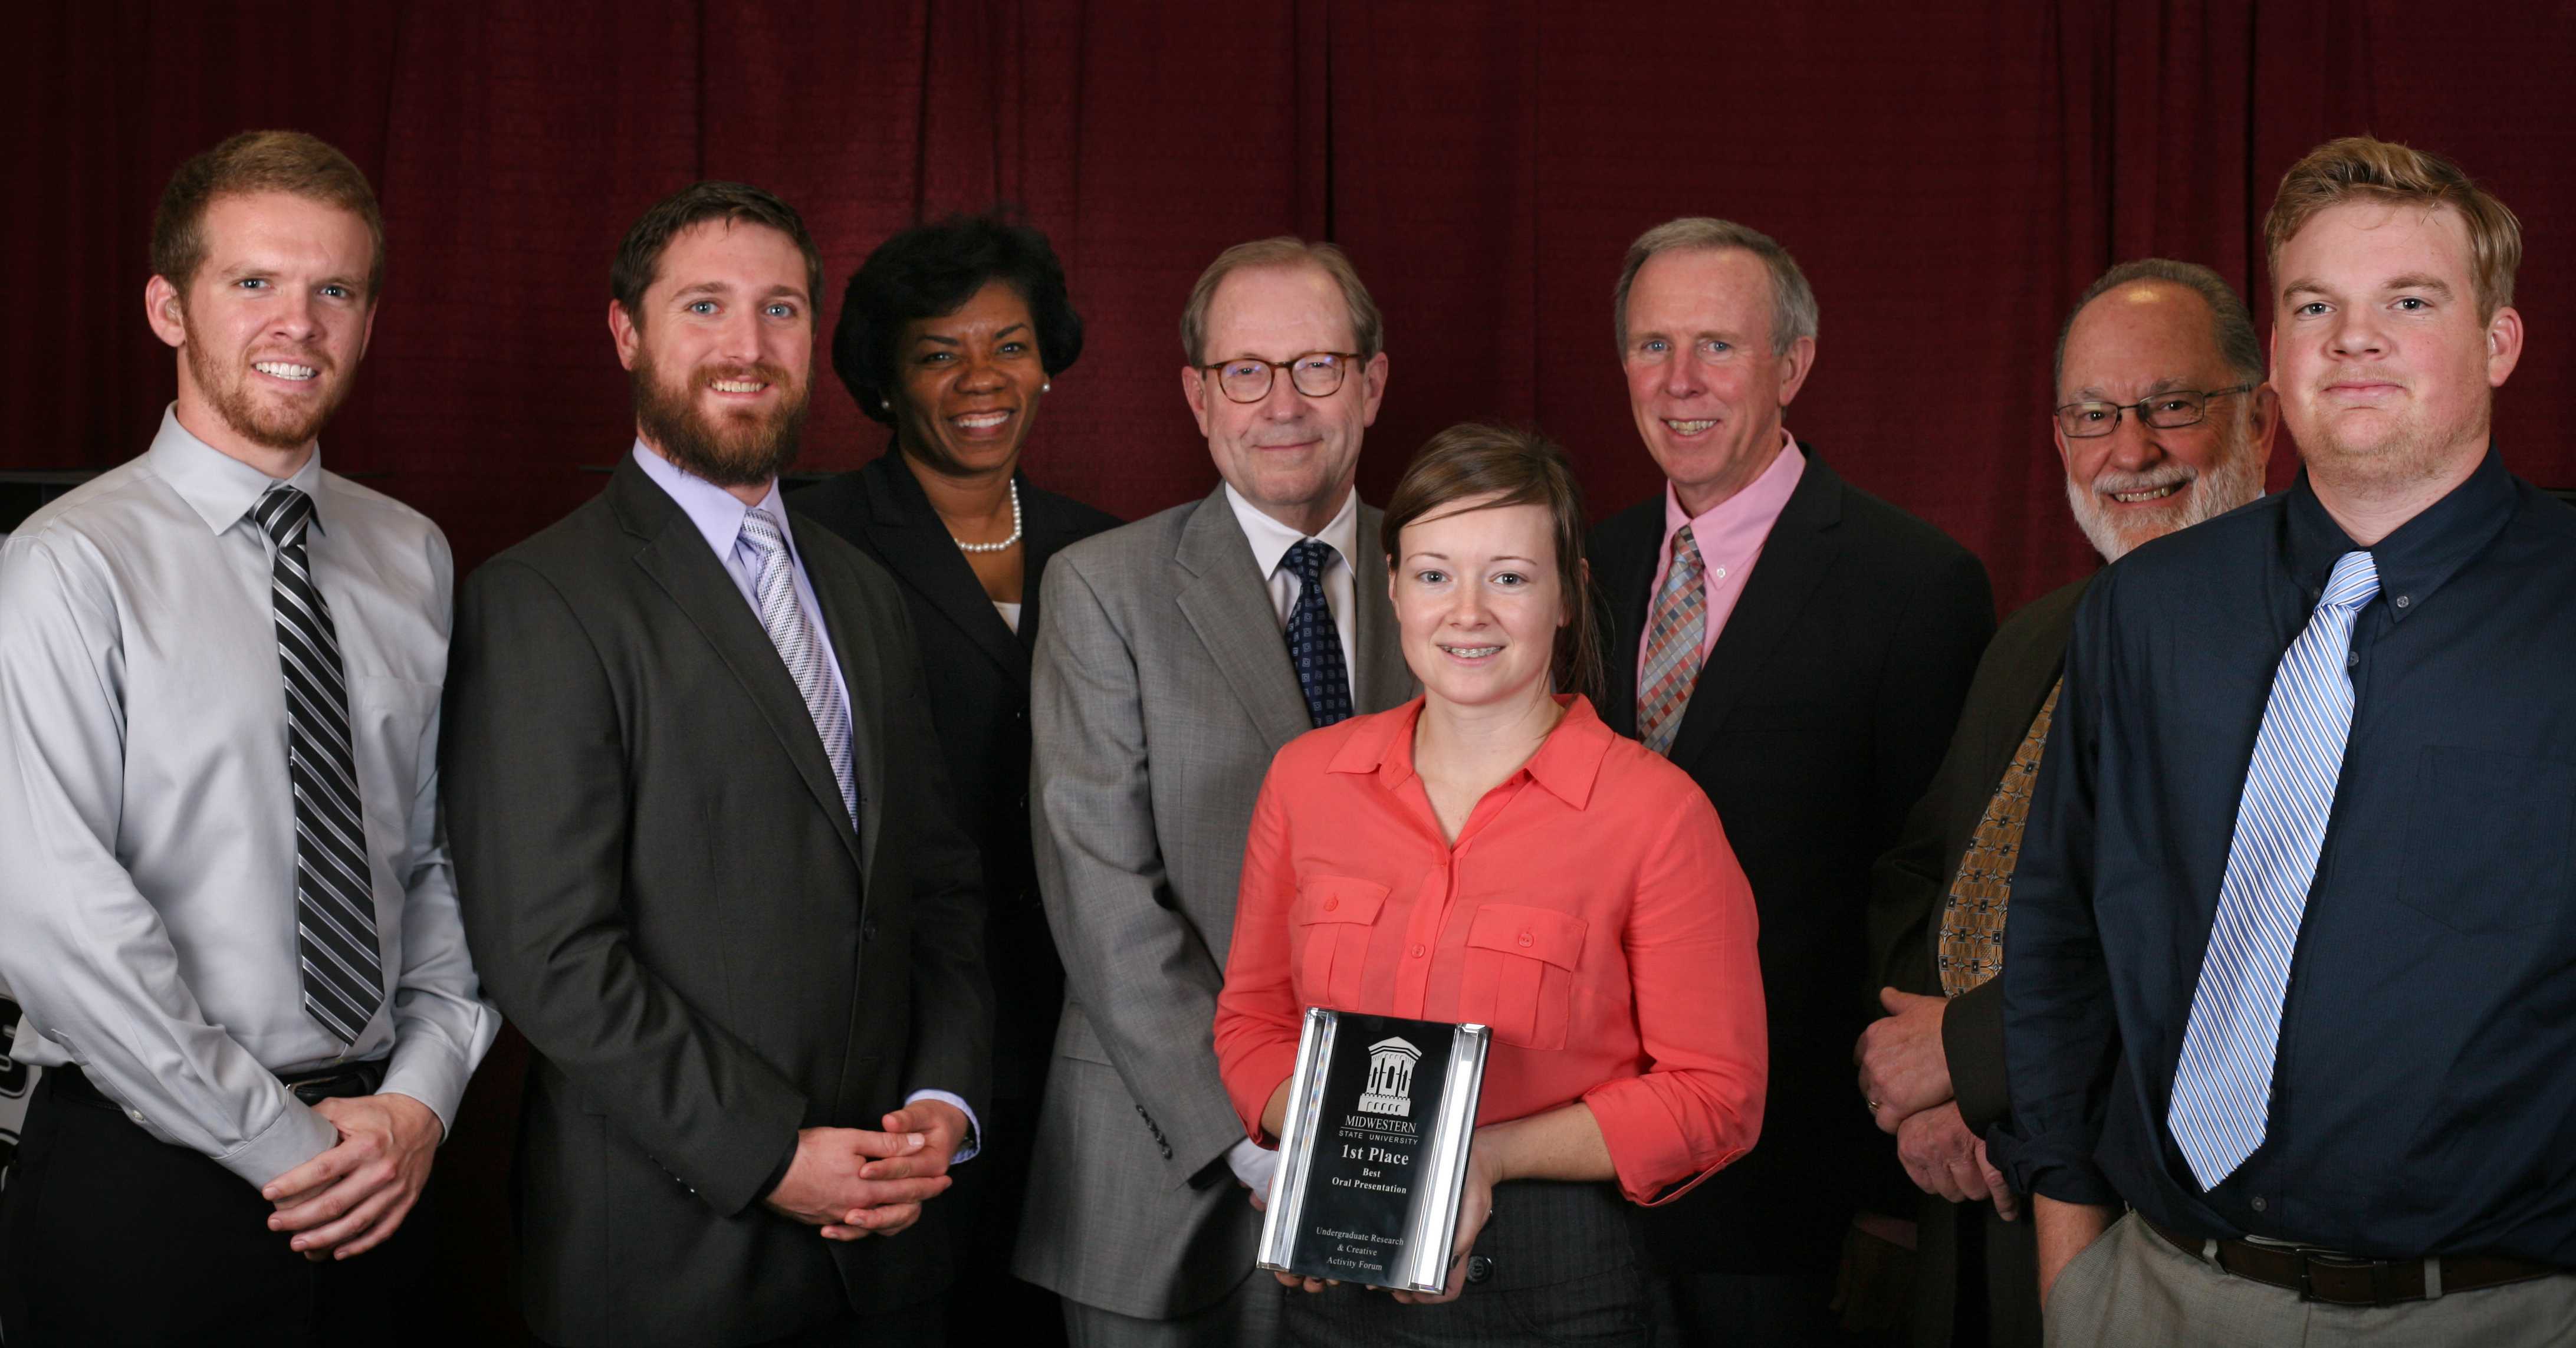 The best oral presentation recognition went to Tylor Thomas, Clarke O'Conner, Johnny Blevins and Makenzie Johnson pictured with Betty Stewart, provost, Jesse Rogers, president, Bill Spellman, executive director of COPLAC, and Robert Clark, vice president of administration and institutional effectiveness, at the Undergraduate Research and Creative Activity Forum at Midwestern State University, Nov. 21. The four were also recongized for having the best abstract. Photo by Eddie Miller